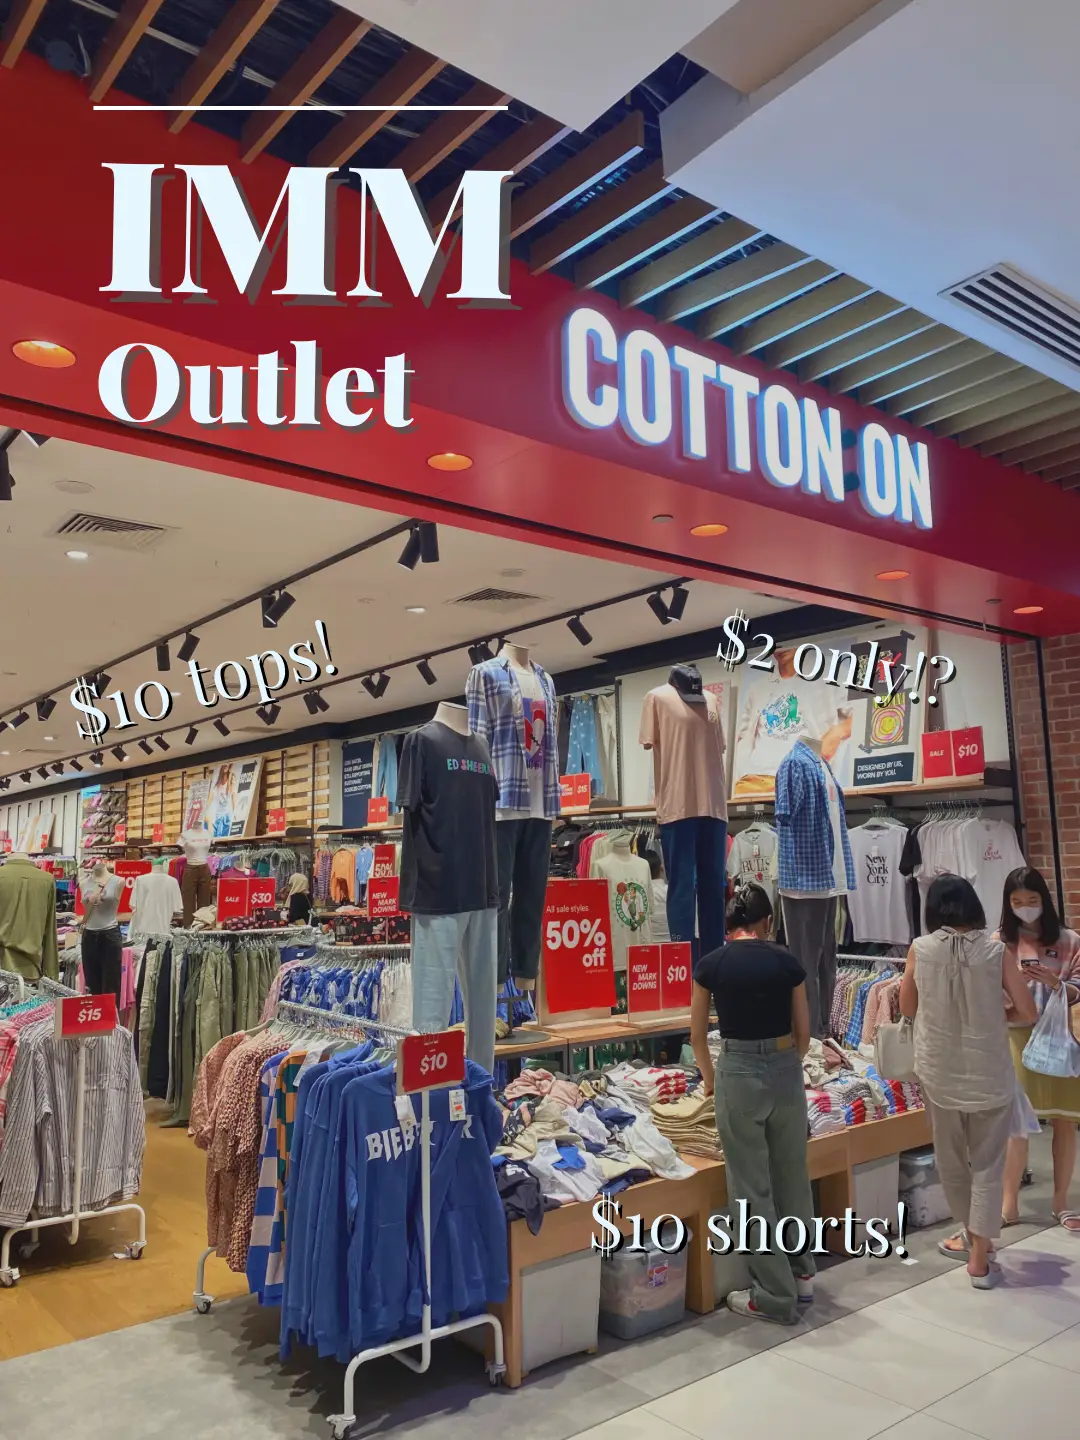 50% OFF at IMM Cotton On Outlet 🔥💵's images